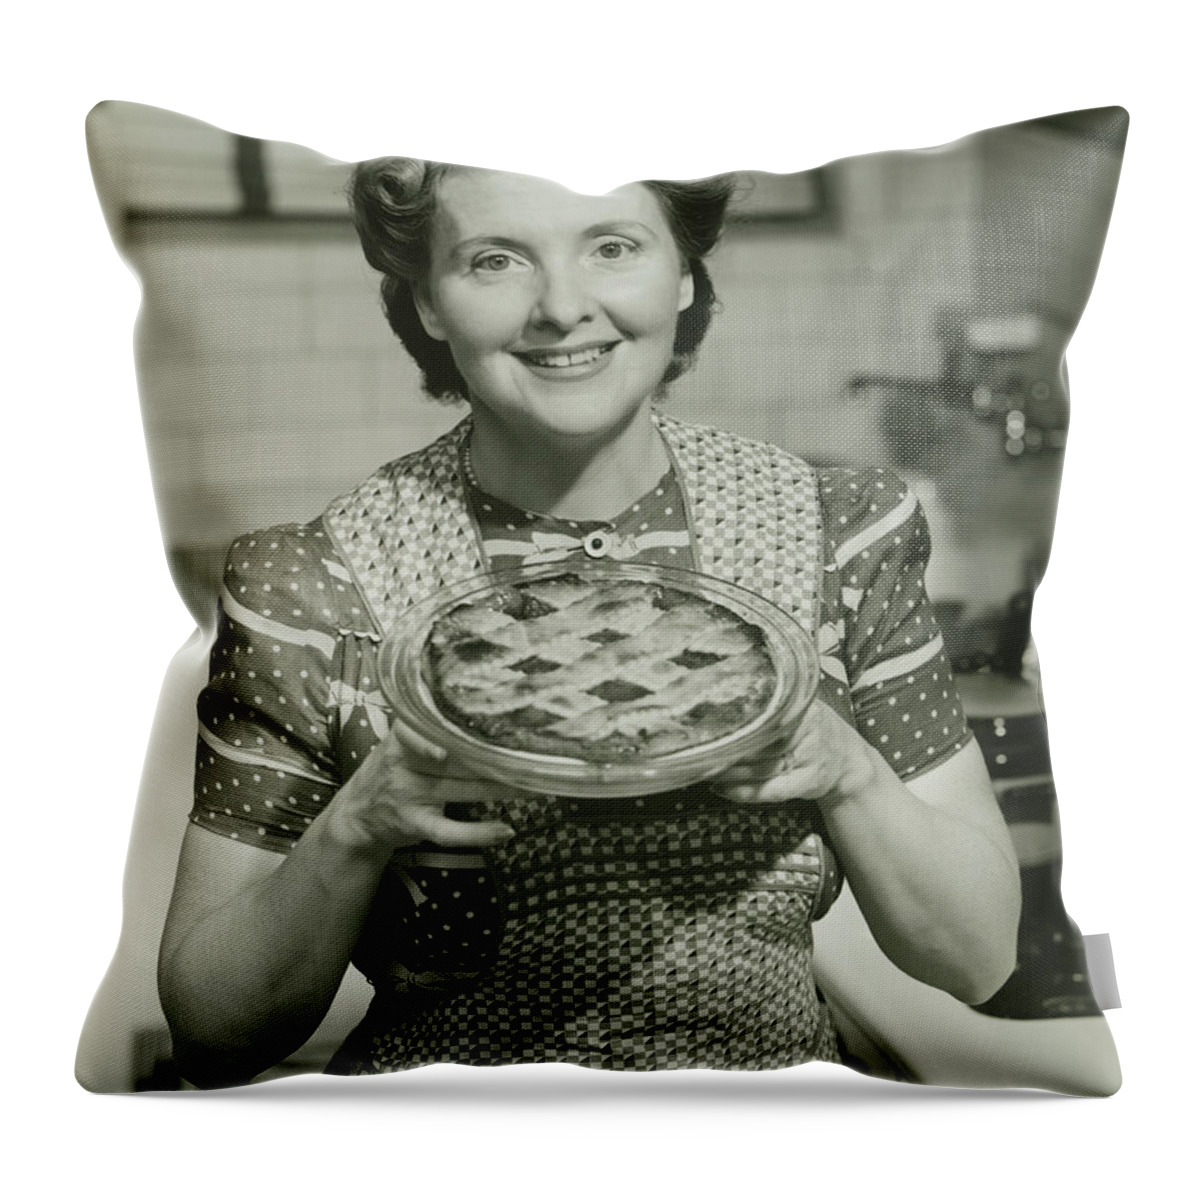 Mature Adult Throw Pillow featuring the photograph Portrait Of Mature Woman Holding Pie by George Marks